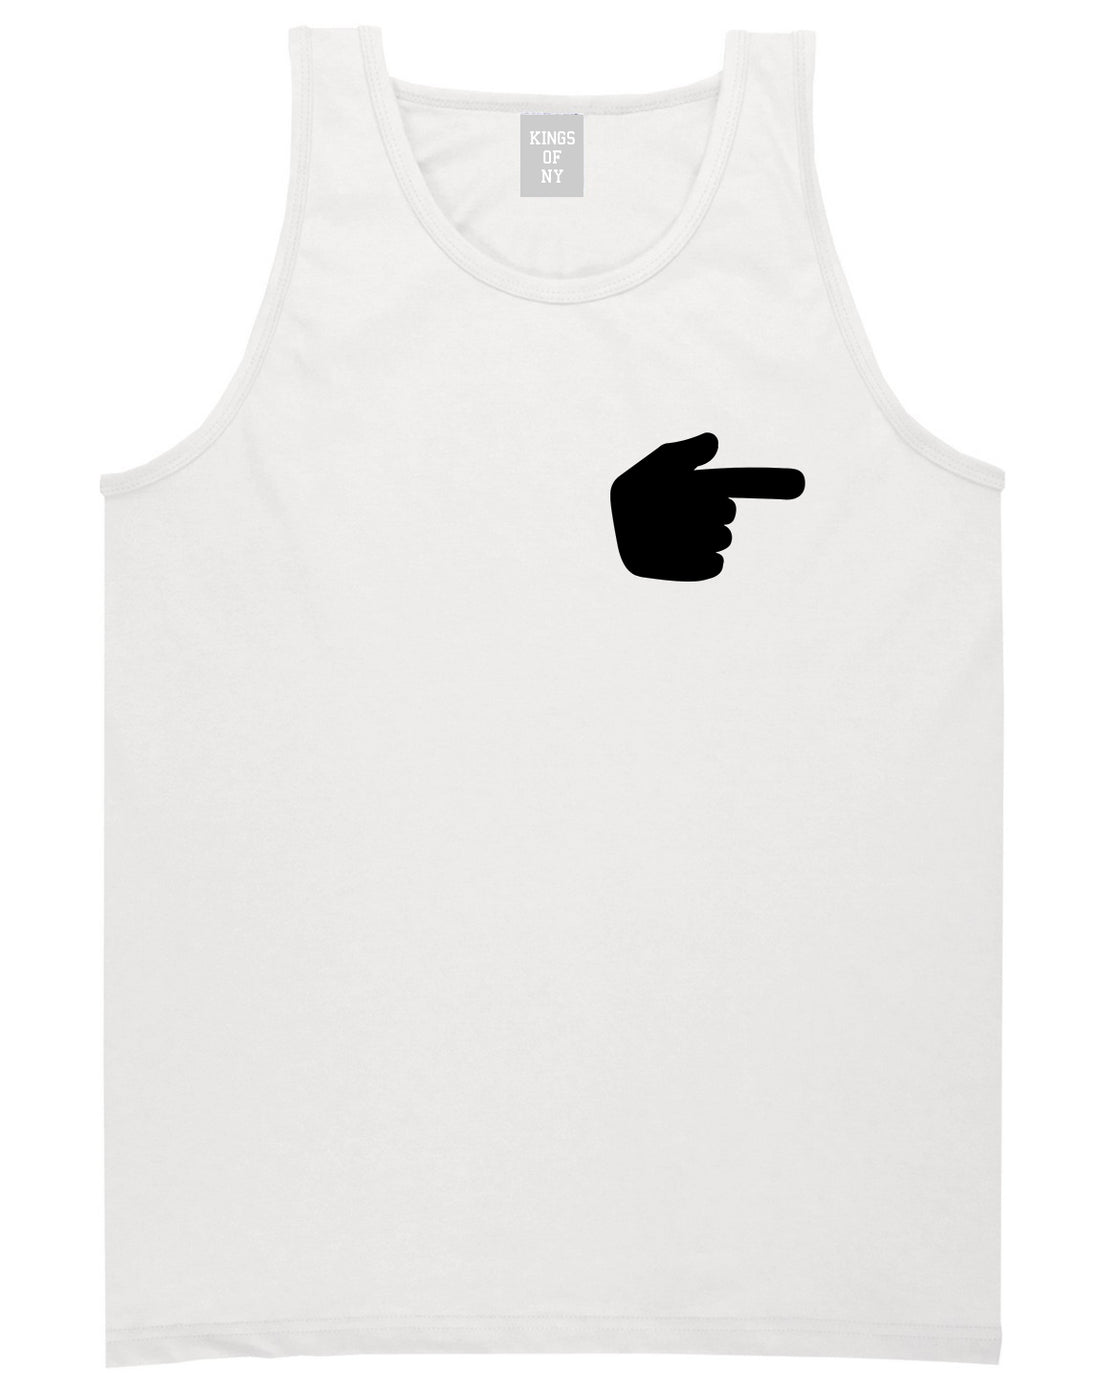 Datway_Pointing_Finger_Emoji_Chest Mens White Tank Top Shirt by Kings Of NY